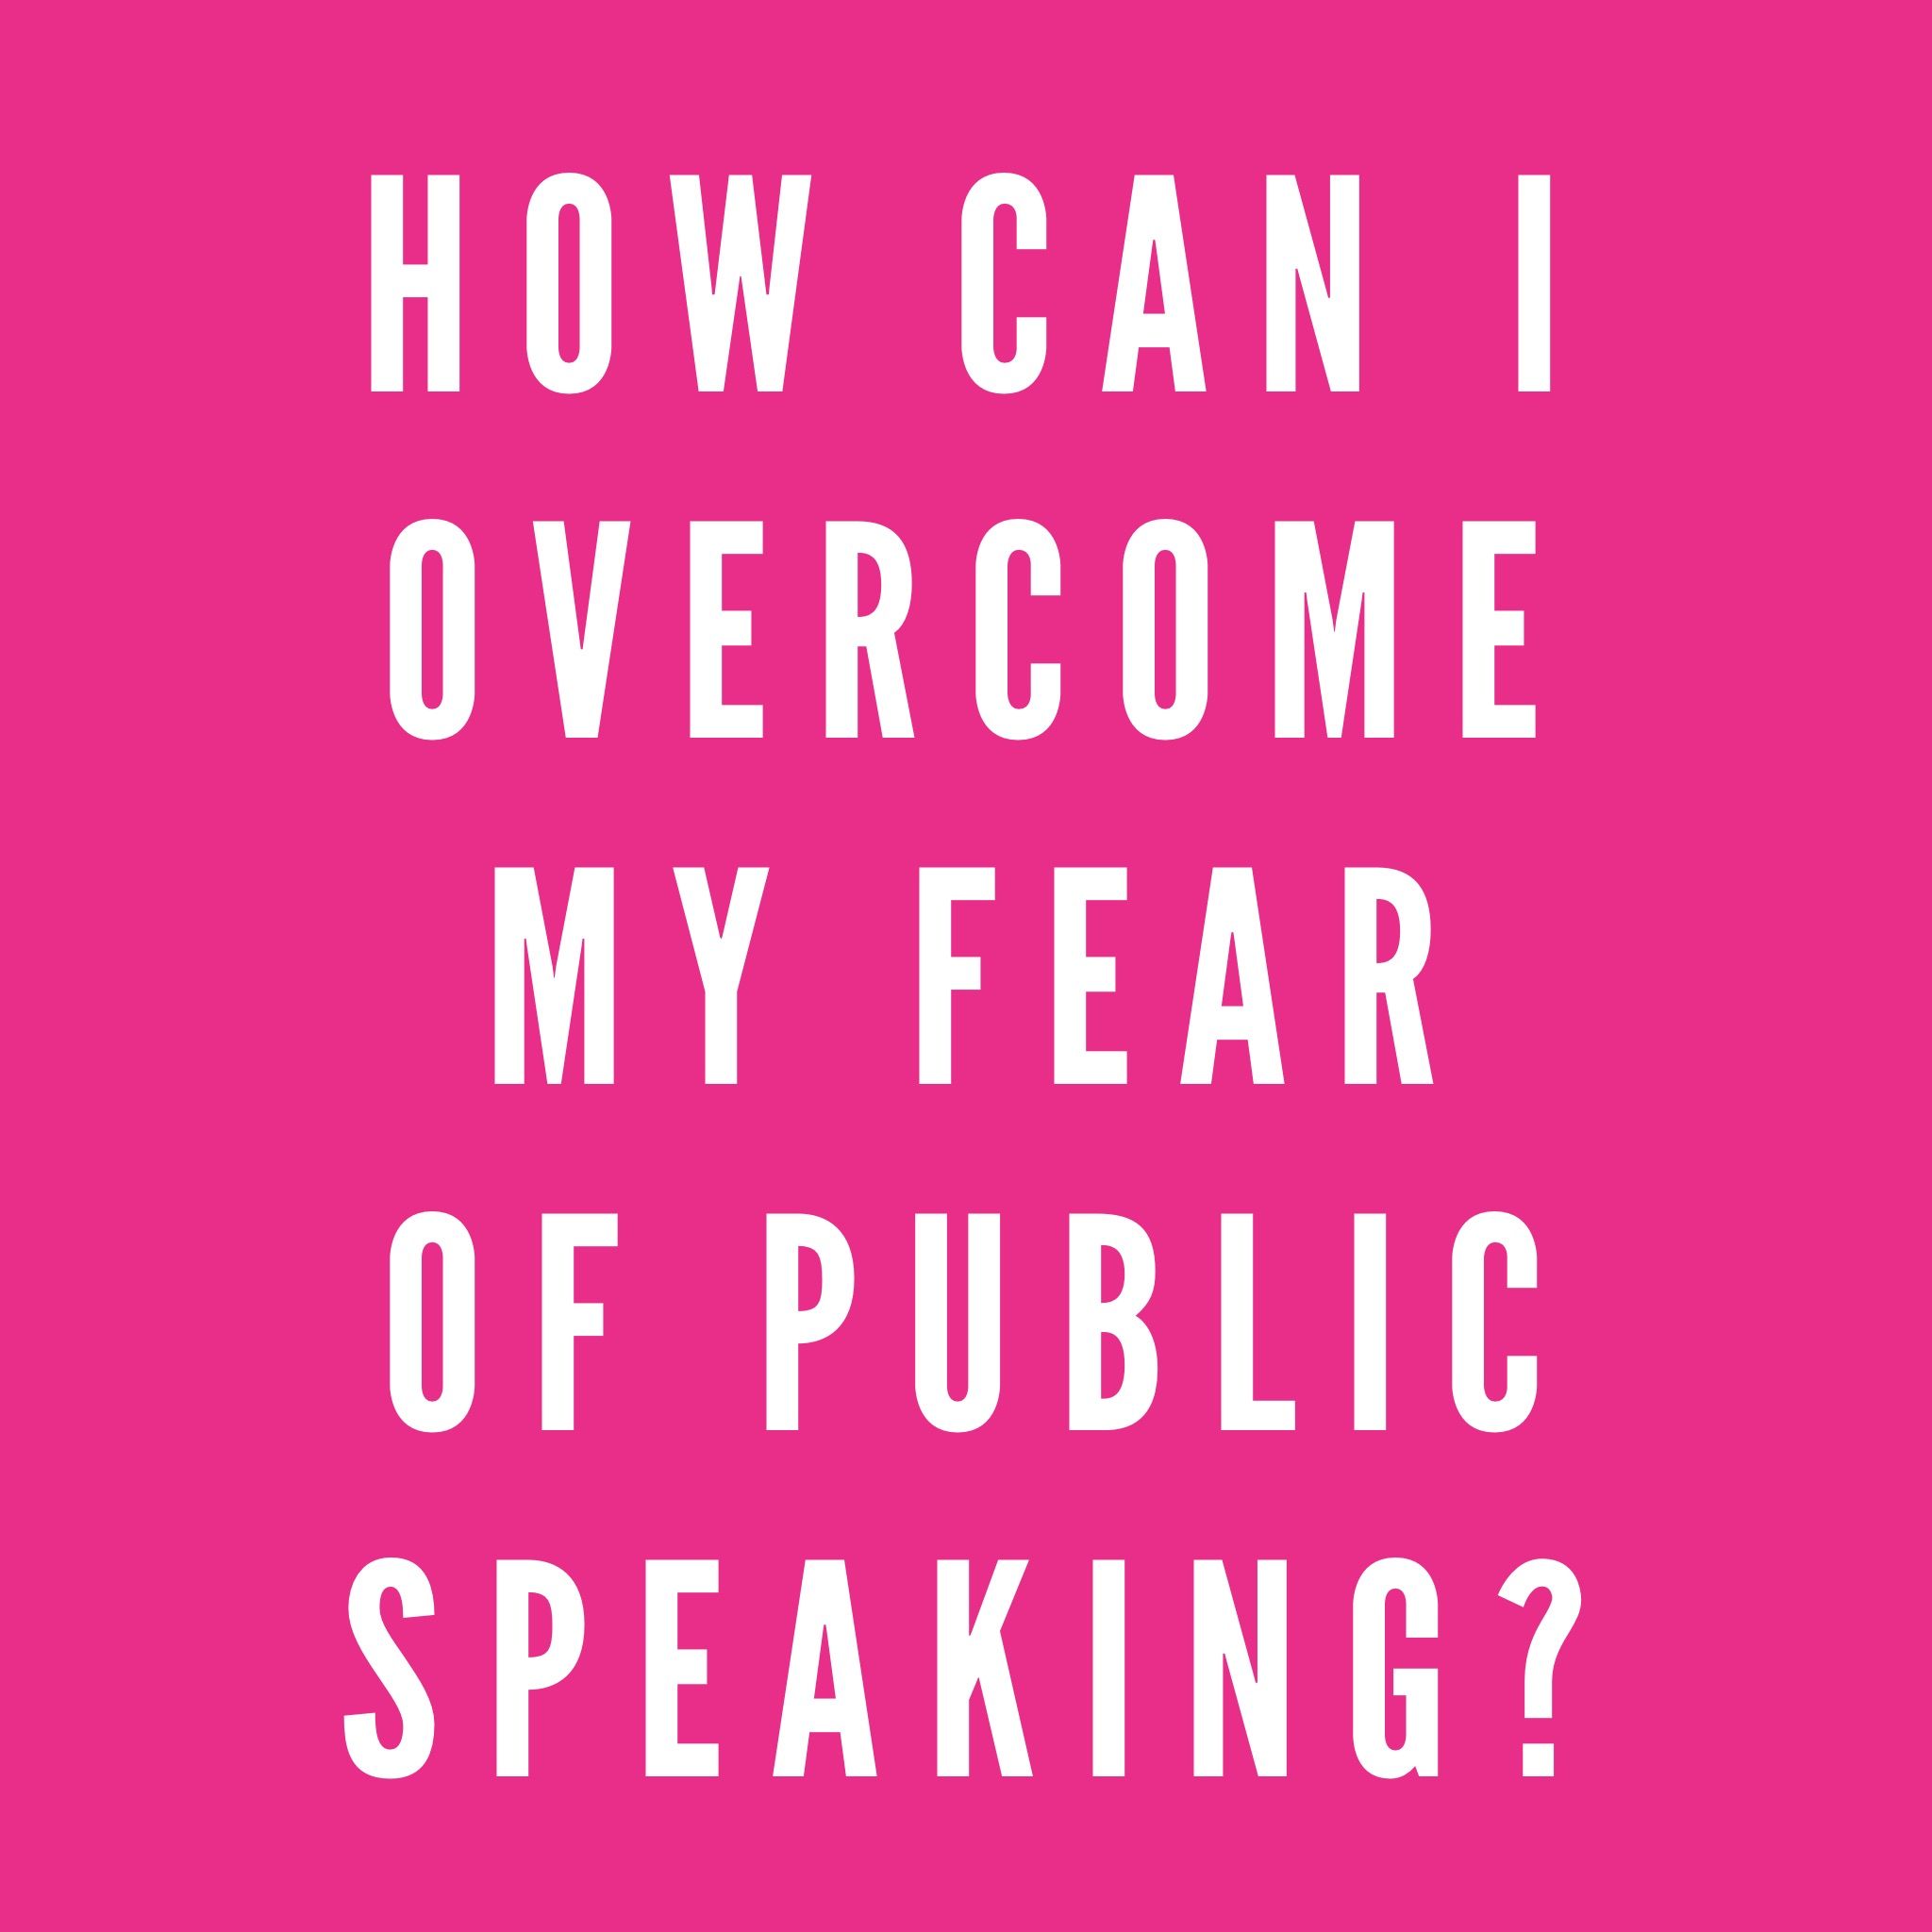 Personal story about fear of public speaking